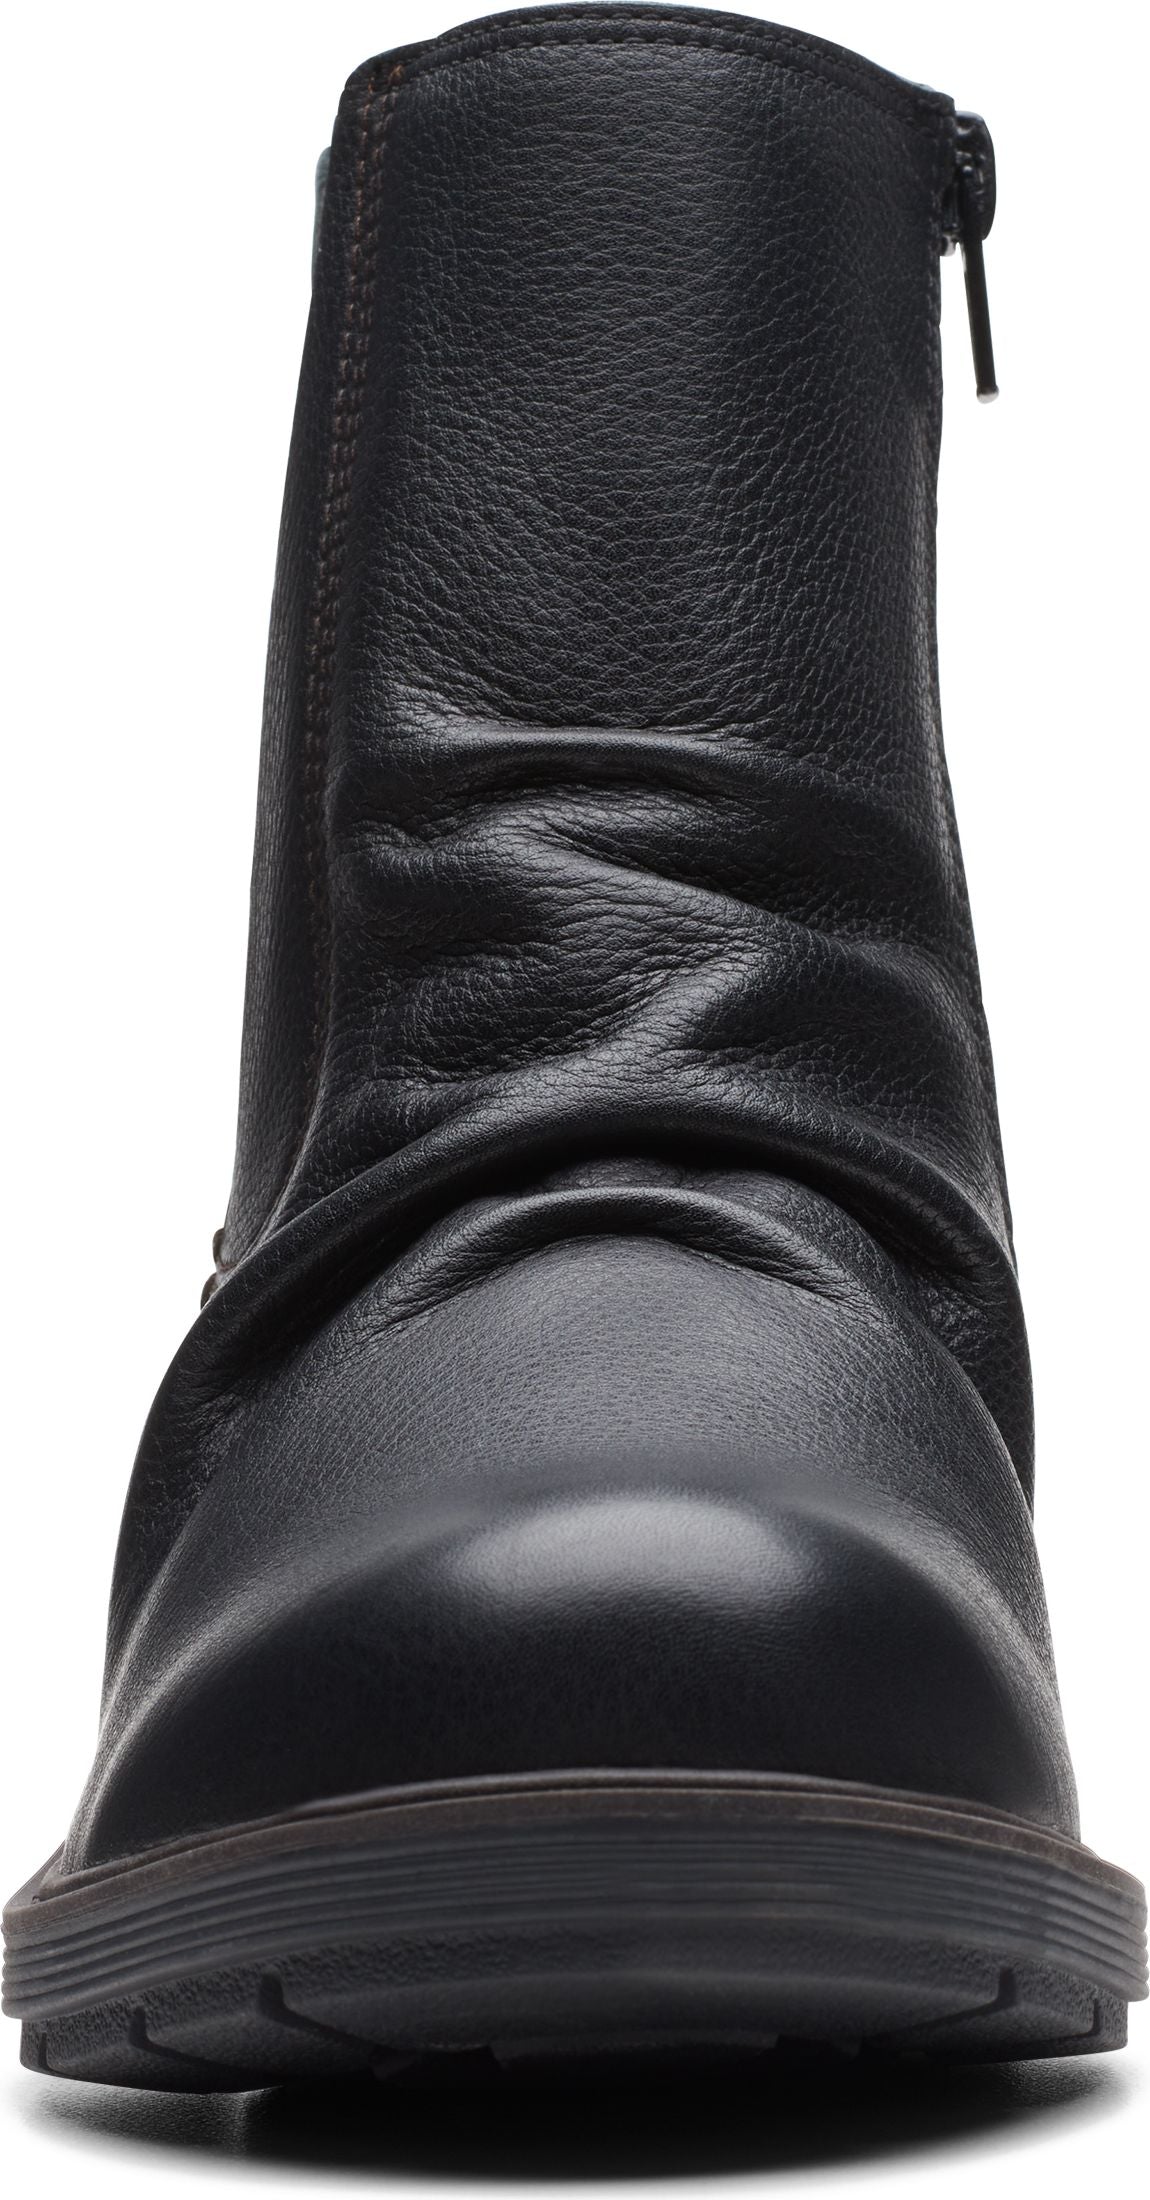 Clarks Boots Hearth Rose Black Leather